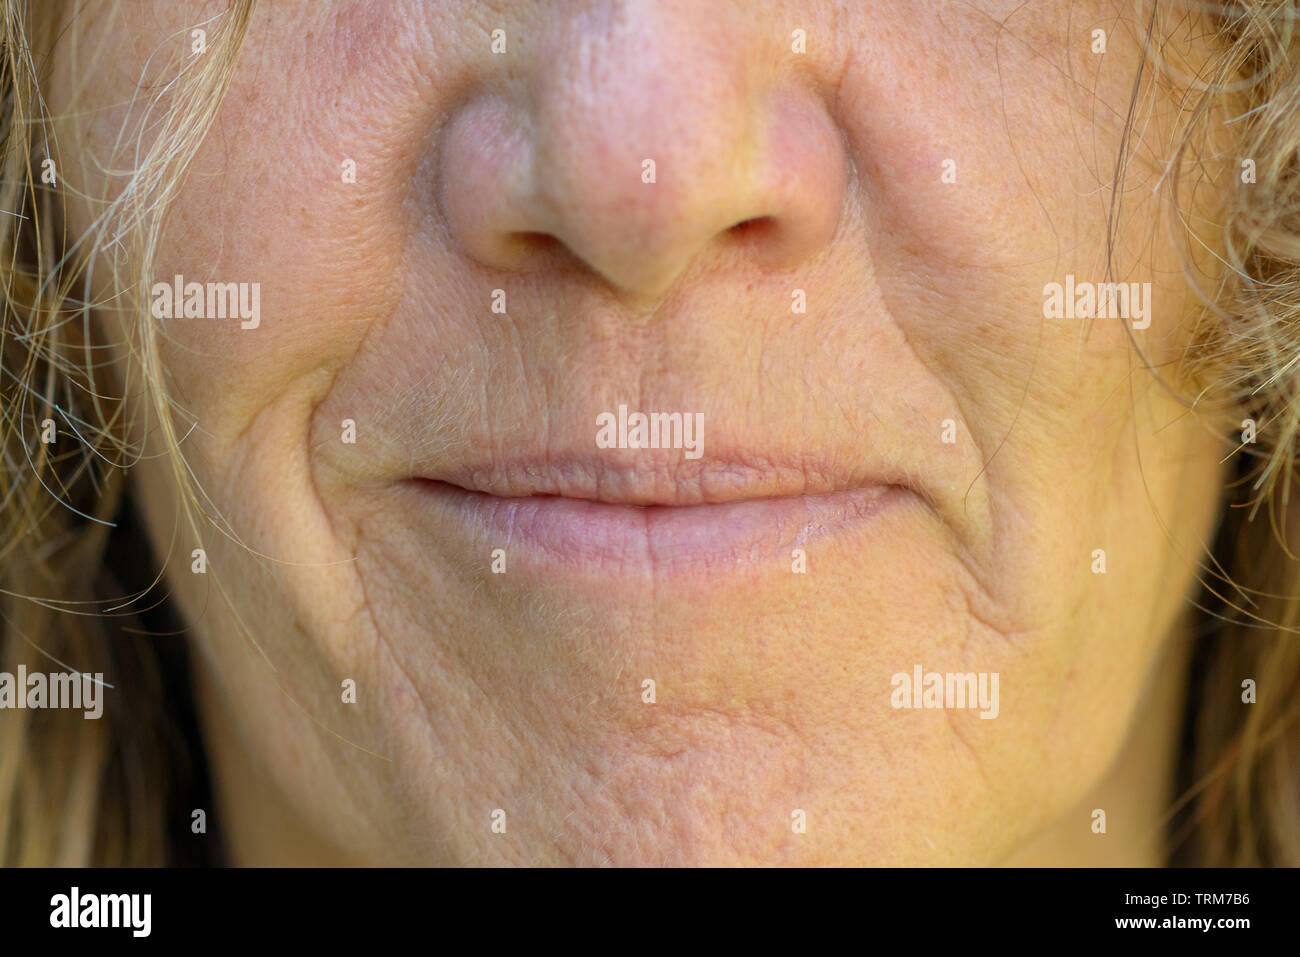 Close up on the mouth, nose and lips of a smiling mature woman showing the effects of ageing on the skin Stock Photo